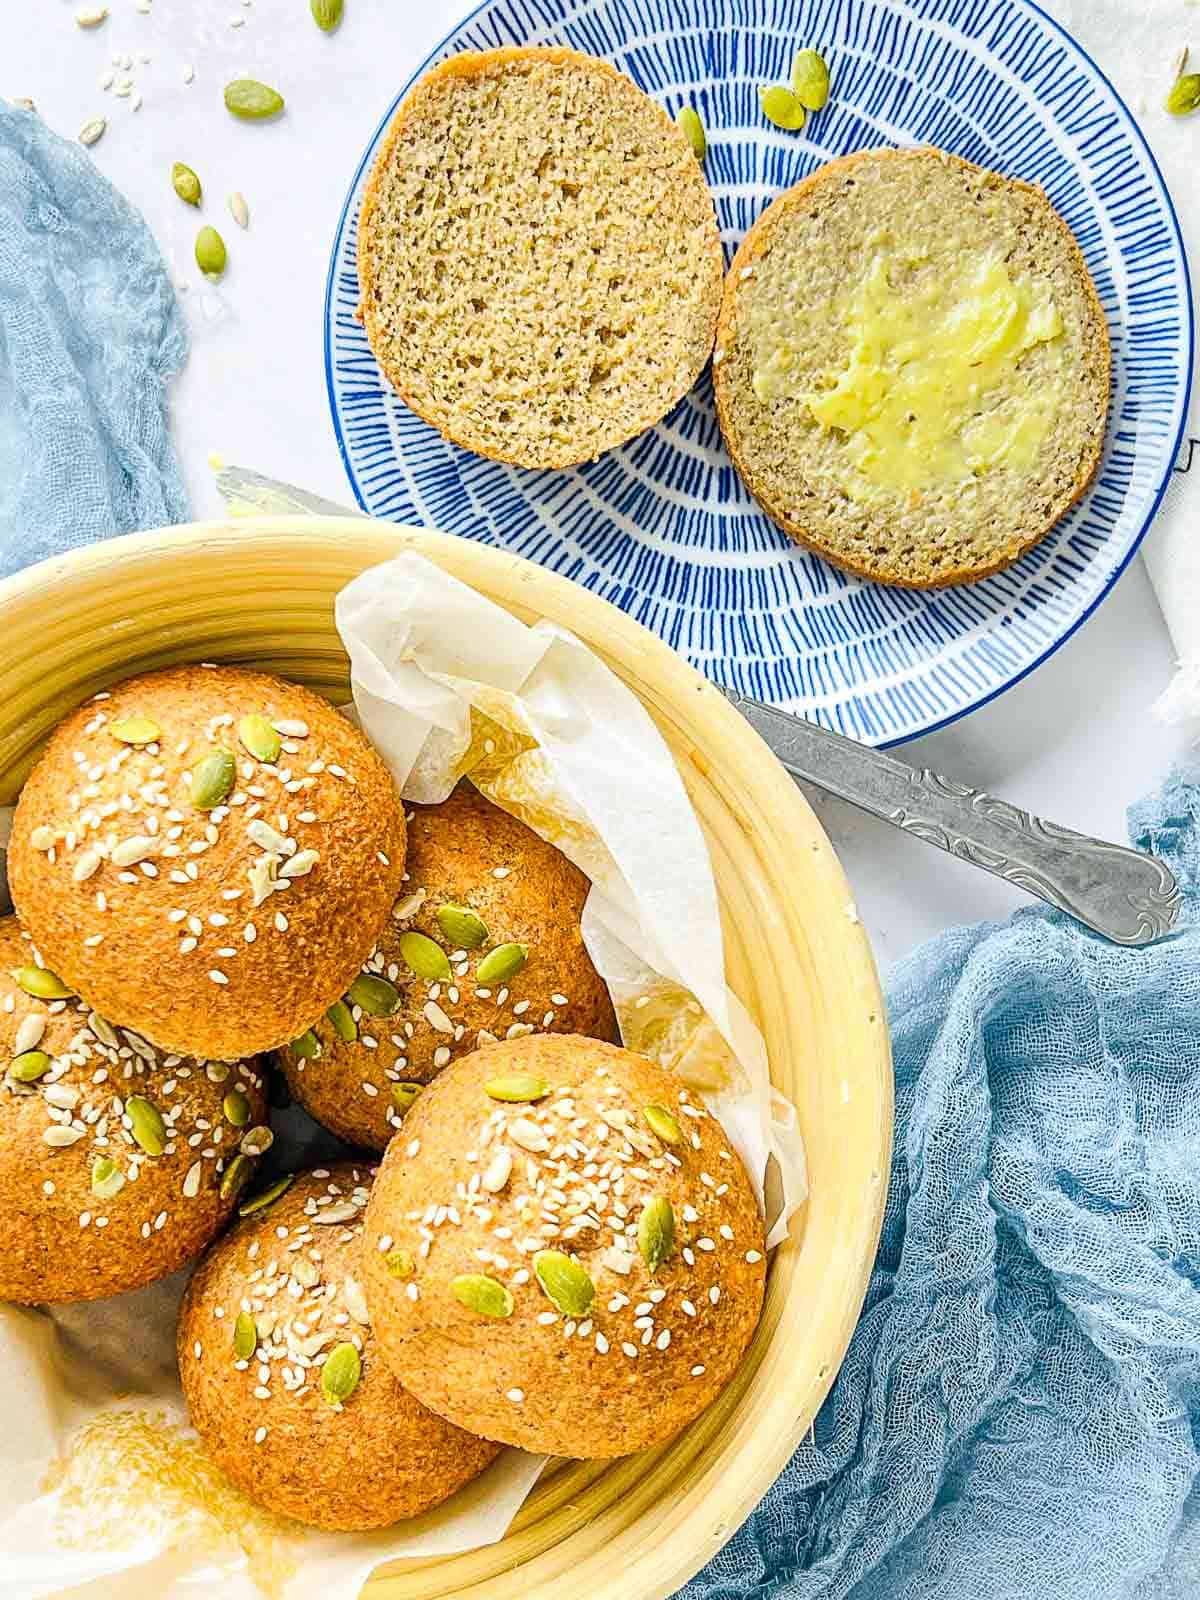 Lentil bread rolls in a basket with on sliced bread roll on a blue plate.